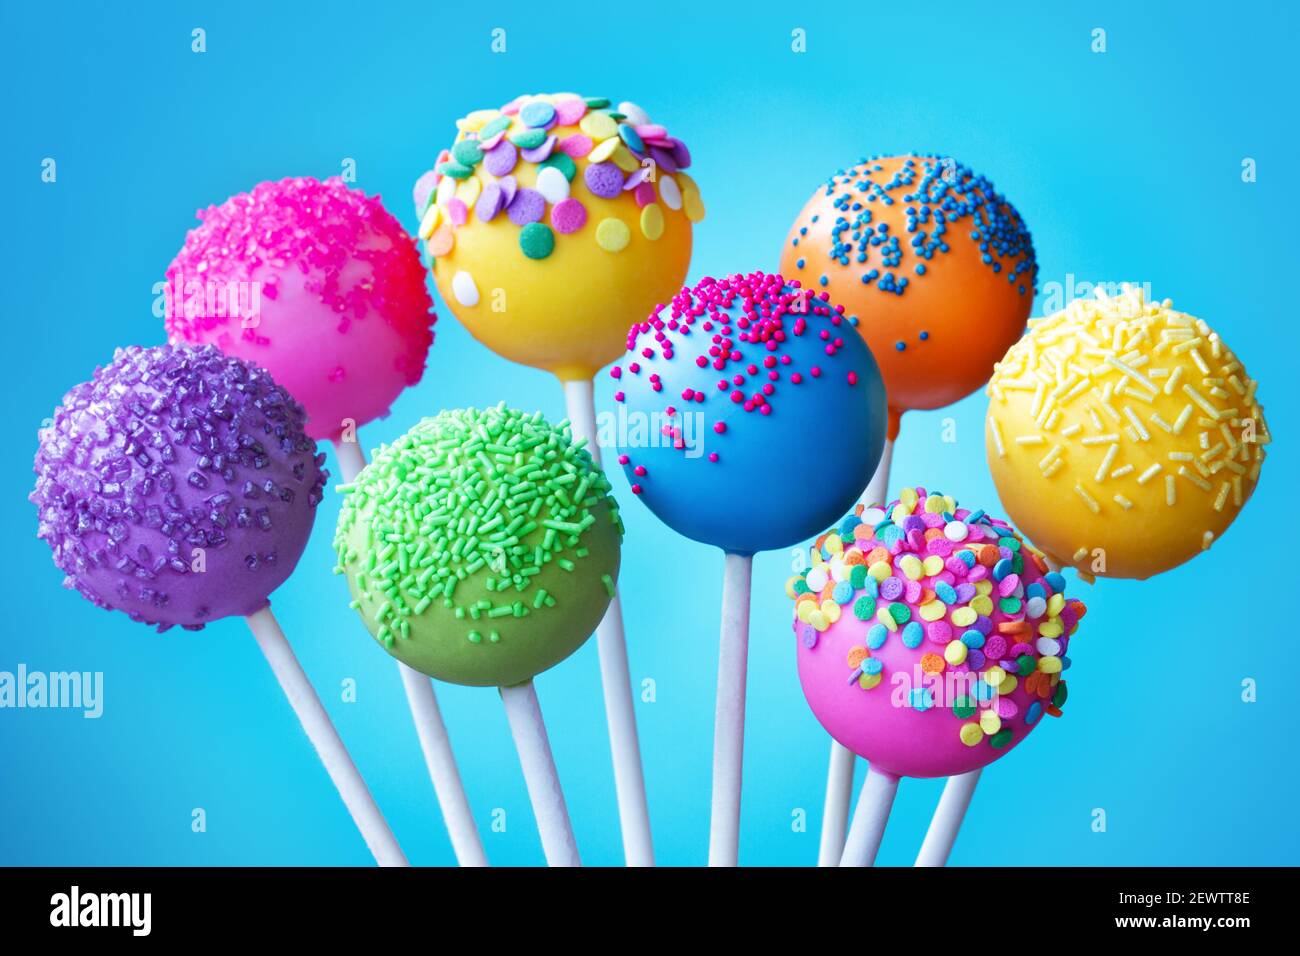 Brightly colored cake pops on a blue background Stock Photo